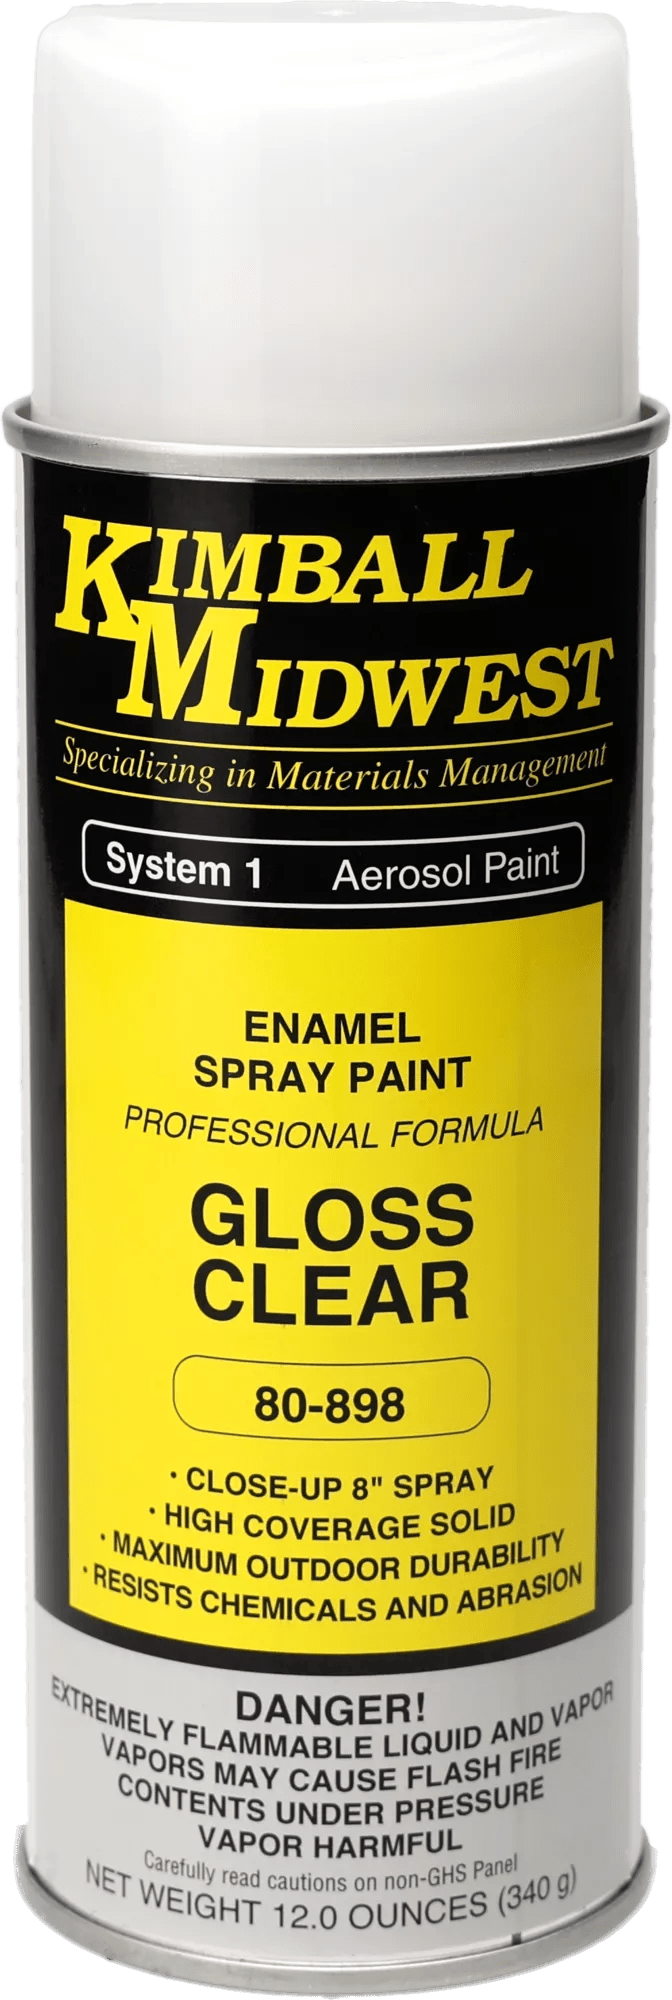 Gloss Clear All-Purpose Enamel Spray Paint - 16 oz. Can